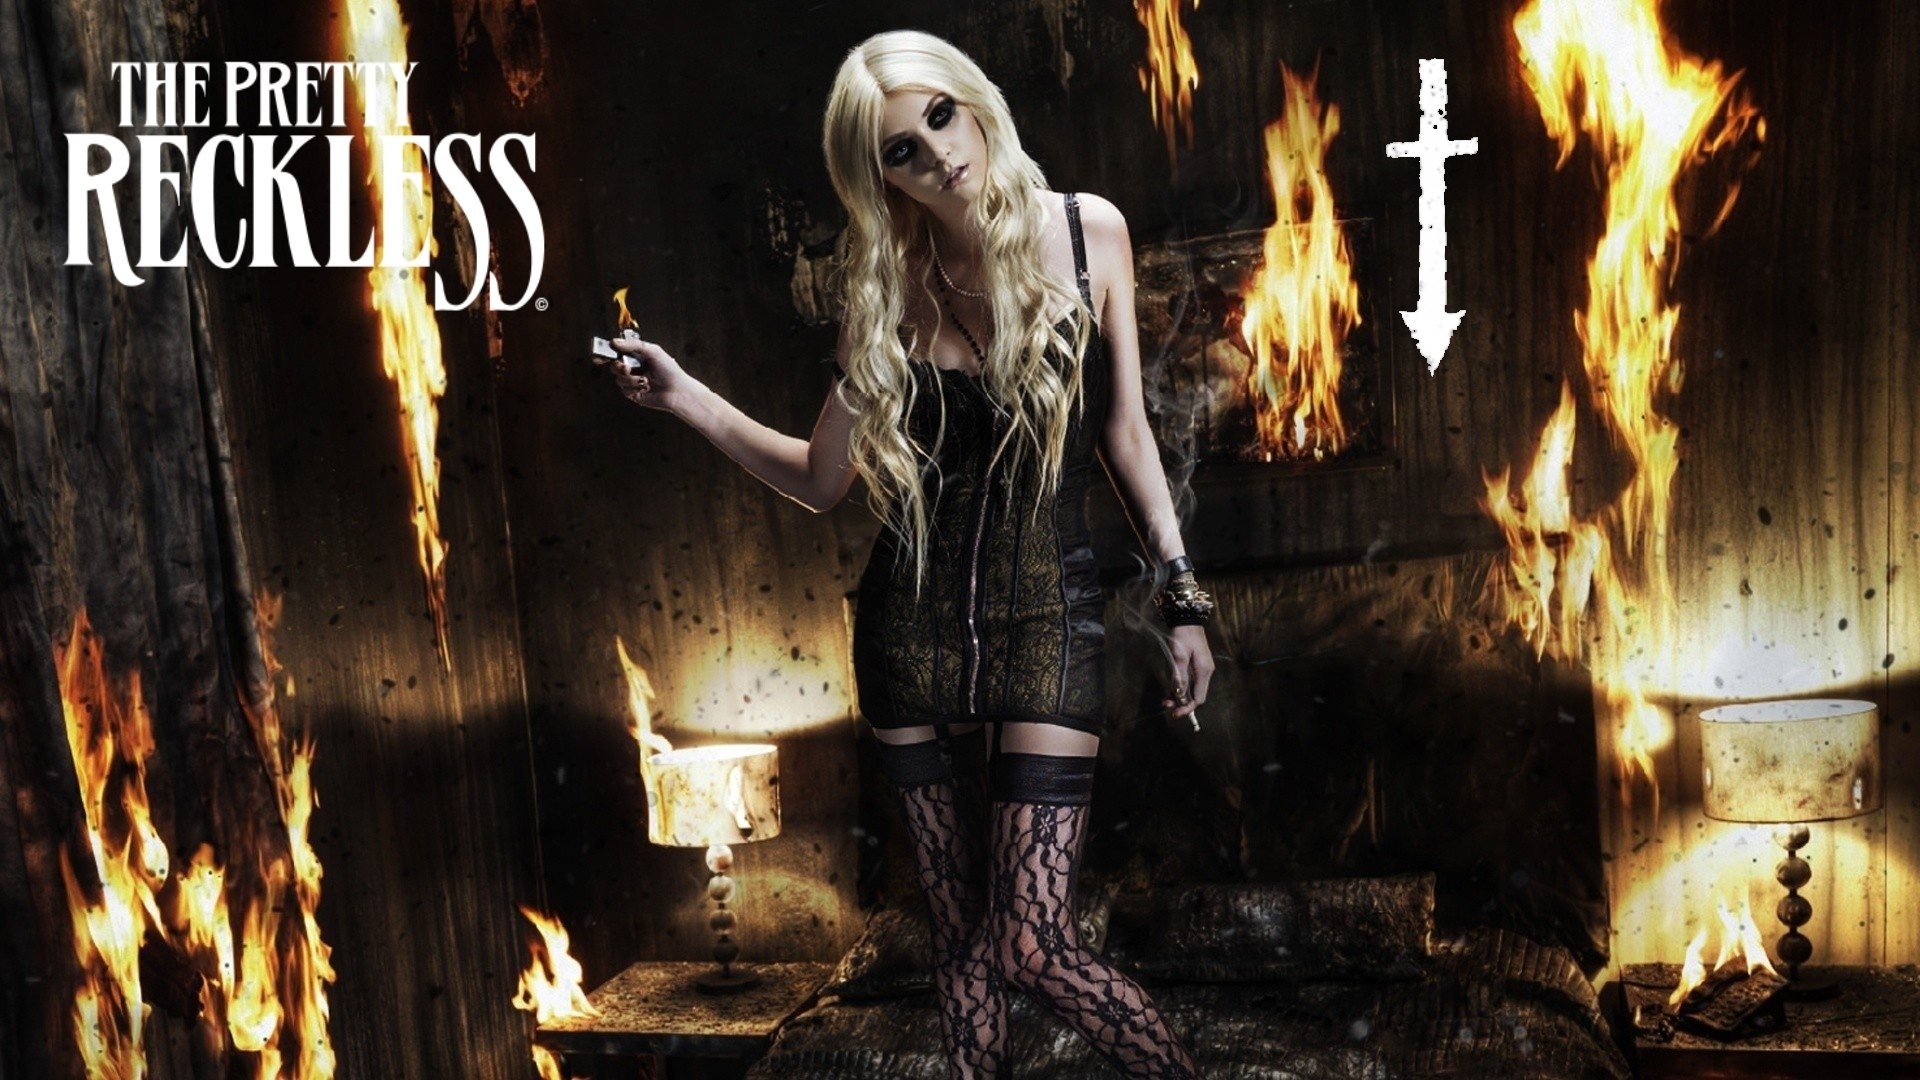 1920x1080 Music - The Pretty Reckless Pretty Reckless Wallpaper